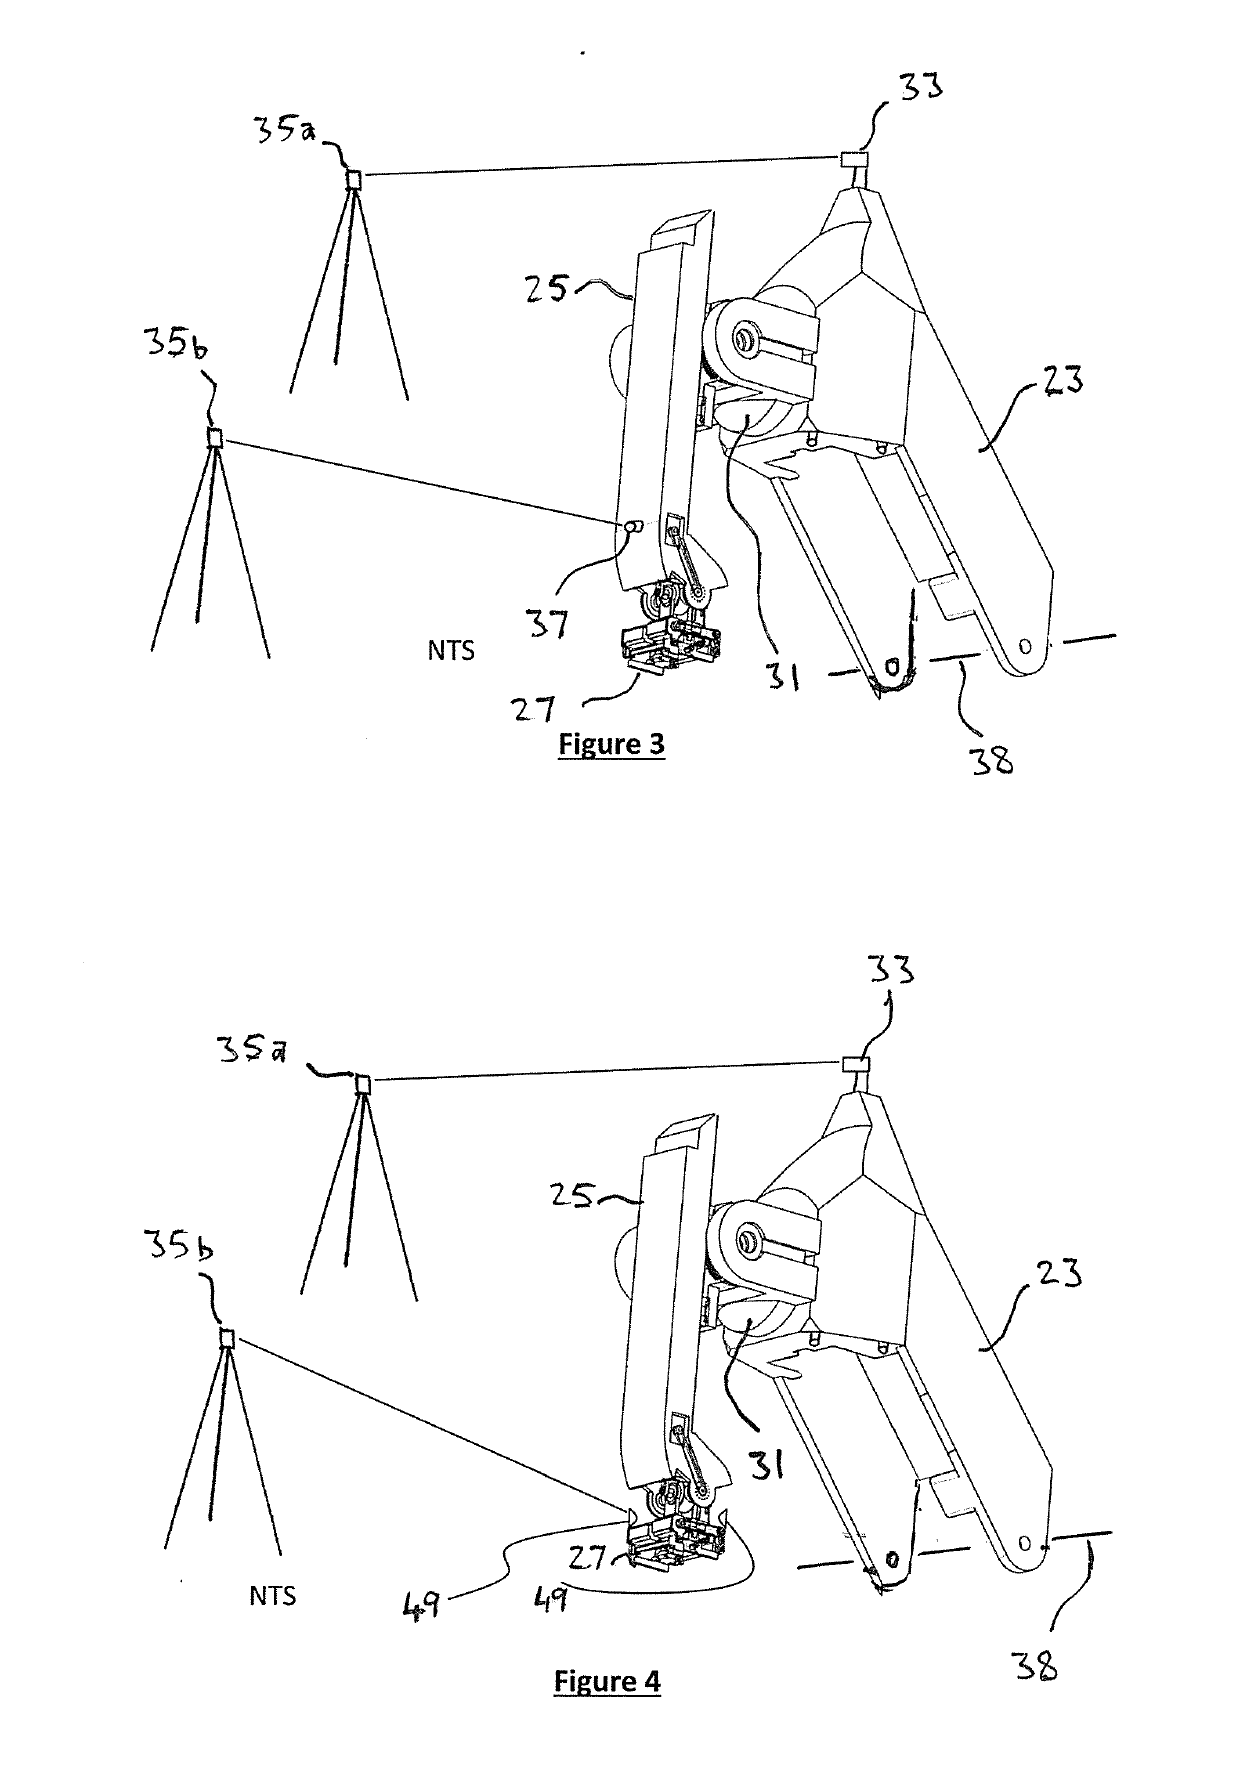 Dynamic compensation of a robot arm mounted on a flexble arm